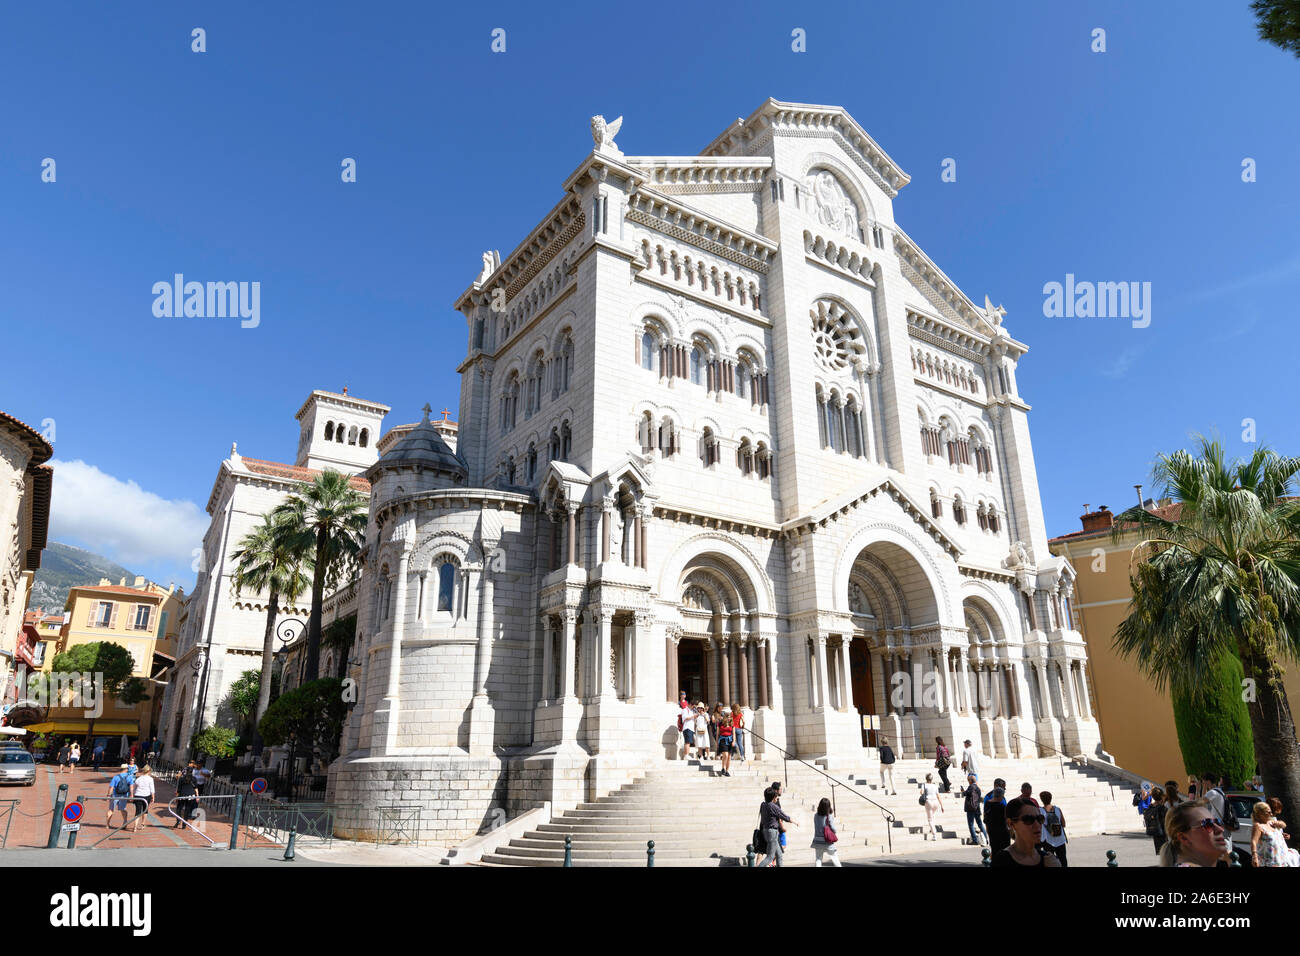 The Cathedral of Our Lady Immaculate sometimes called Saint Nicholas Cathedral, or Monaco Cathedral is the cathedral of the Roman Catholic Archdioces Stock Photo